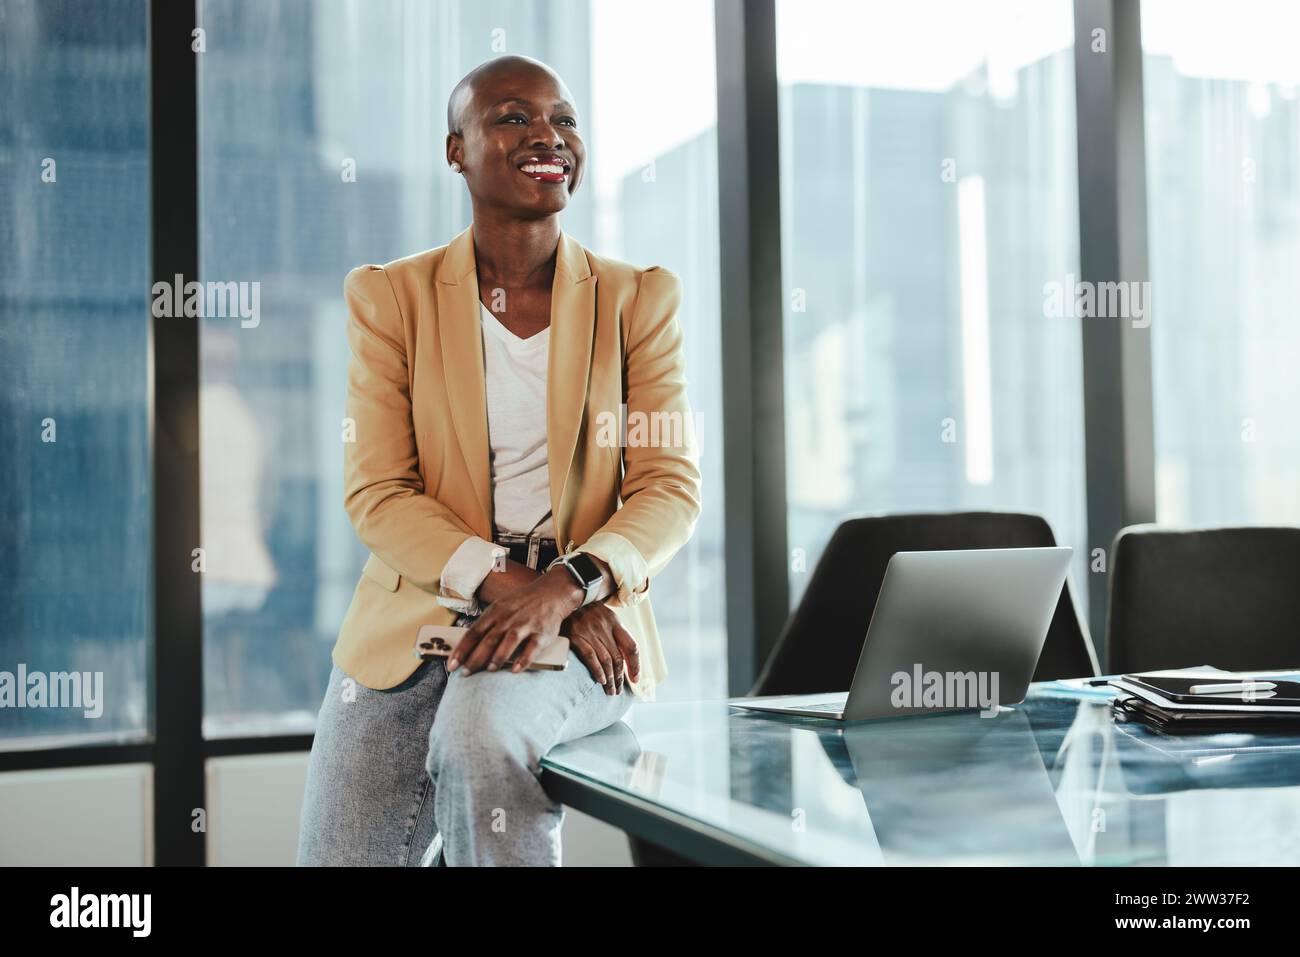 Confident African businesswoman in an office, sitting at a table. She is happy and successful, smiling while looking away. Her professionalism and ent Stock Photo